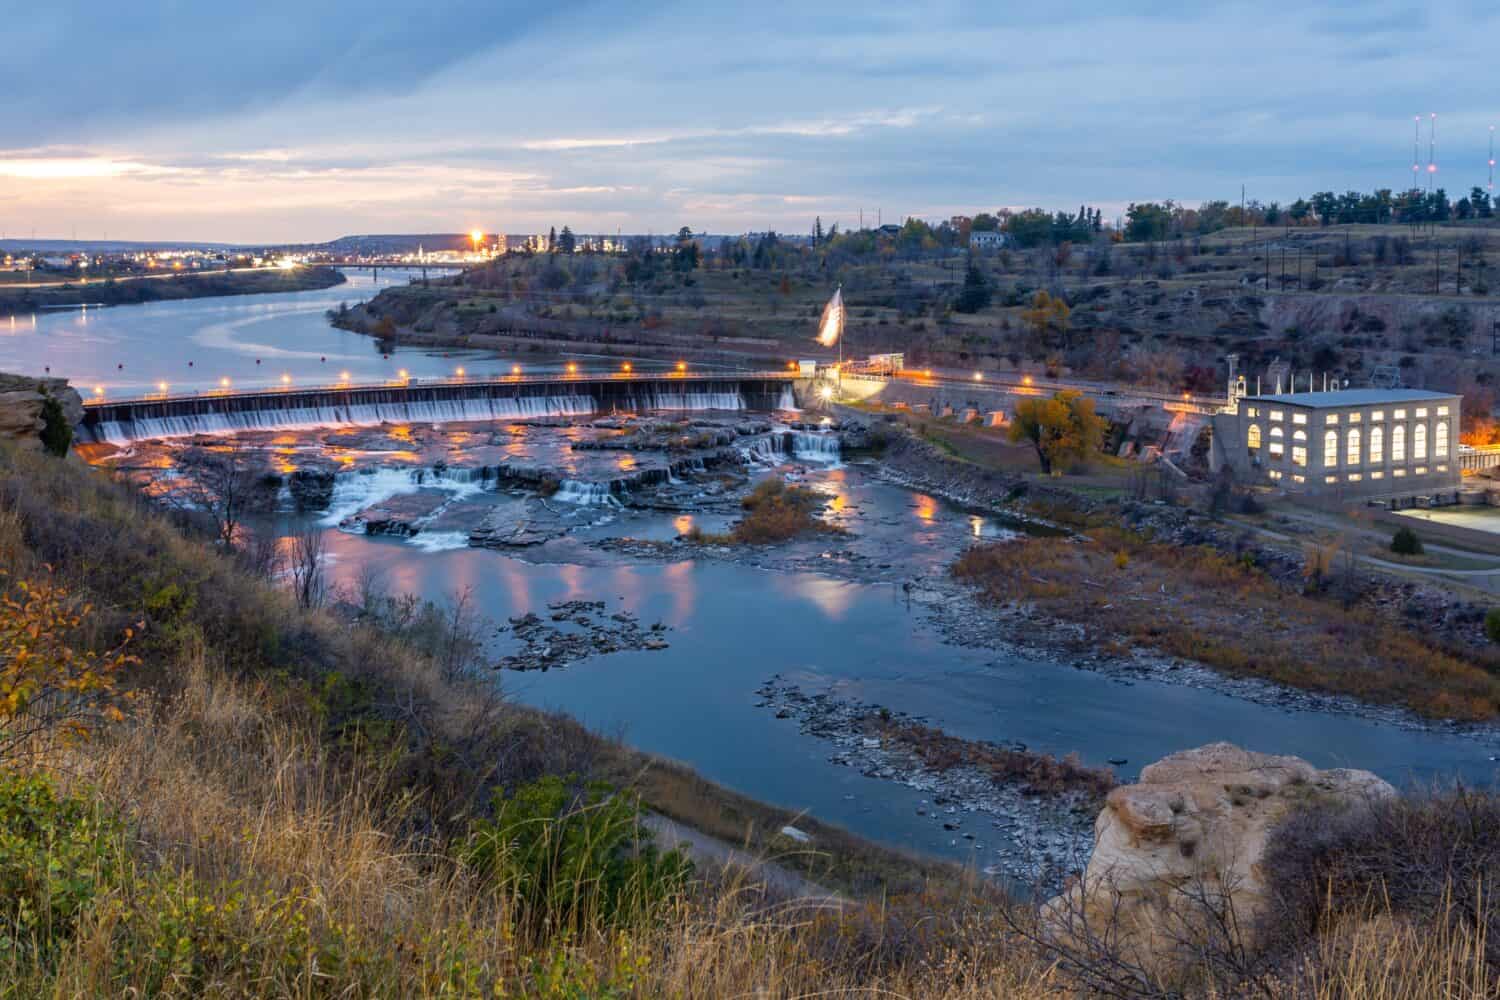 Beautiful view of the Great Falls in Montana in twilight